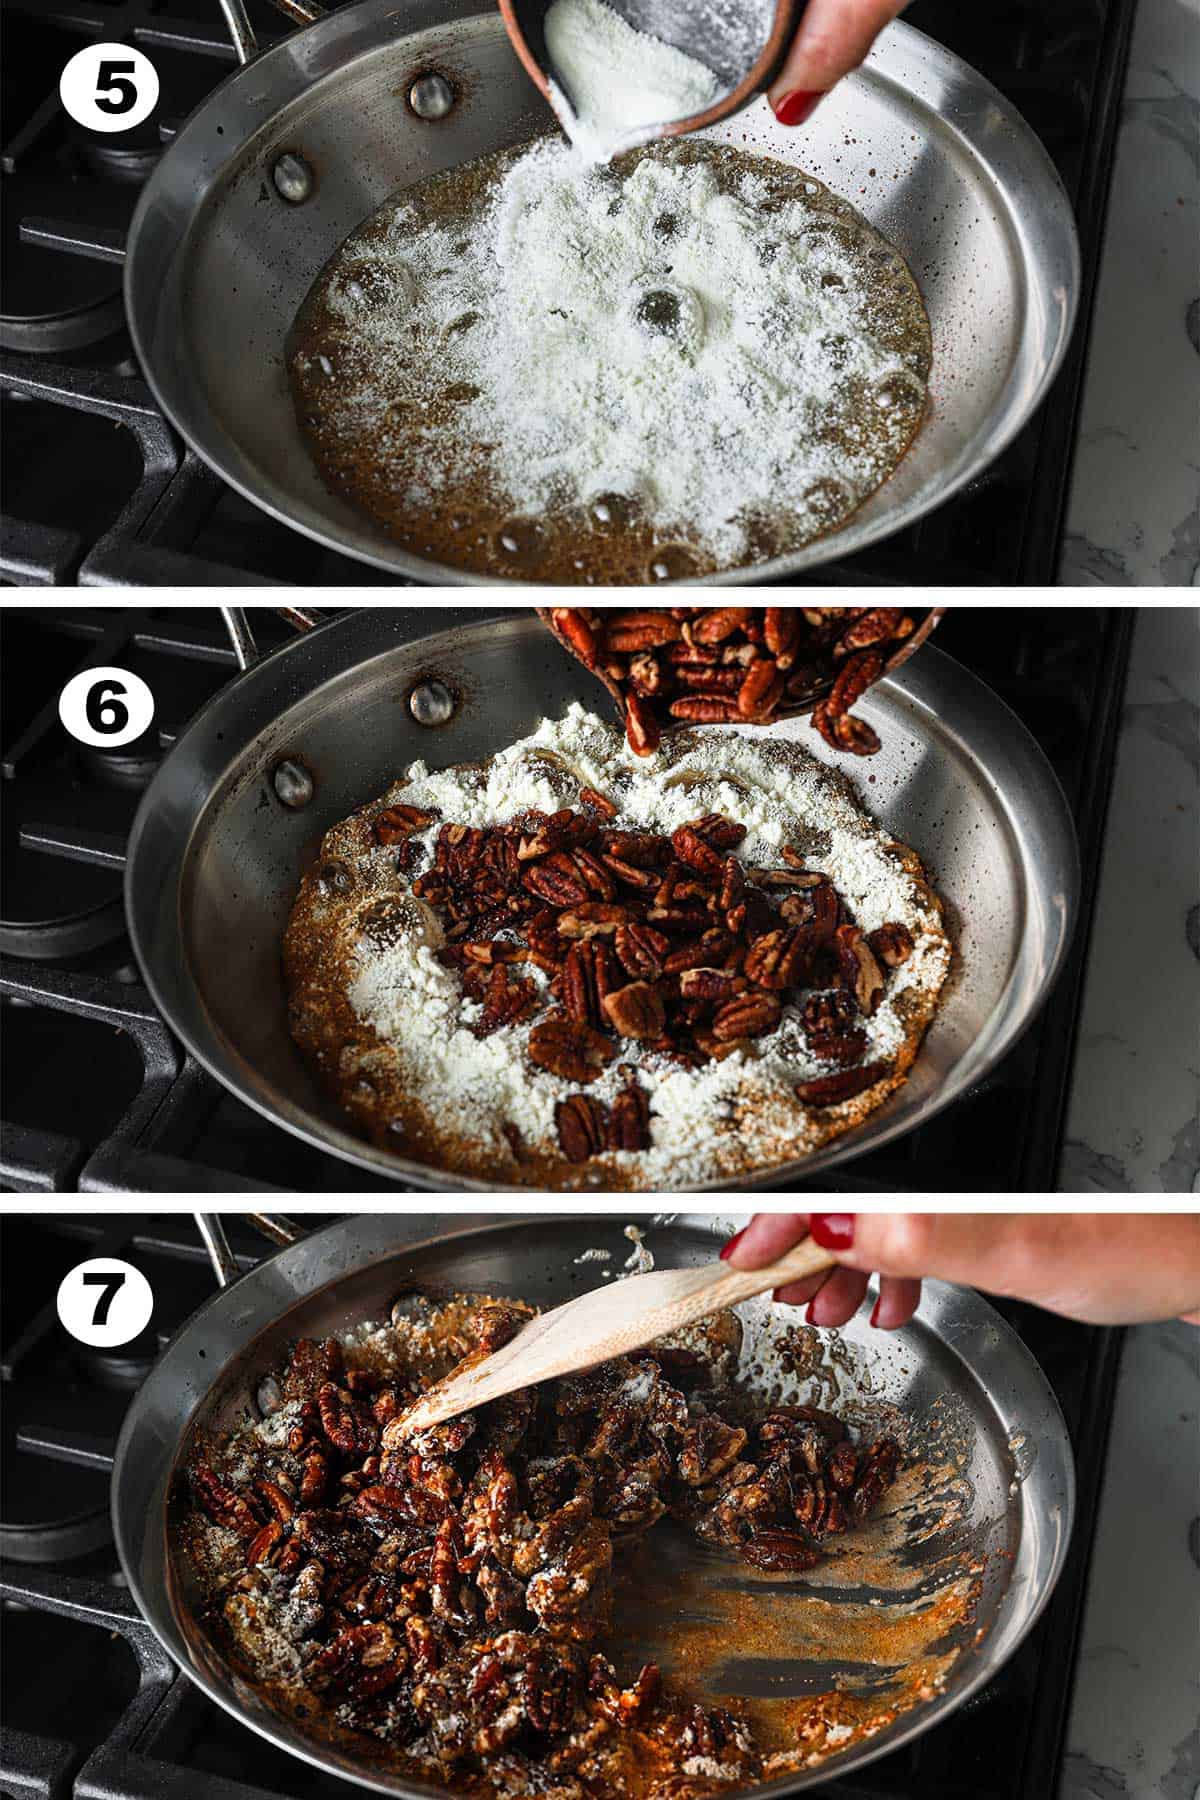 A step by step instruction on how to make caramelized nuts in a skillet. Add dried milk powder to the brown sugar or white sugar then add the pecans and stir.